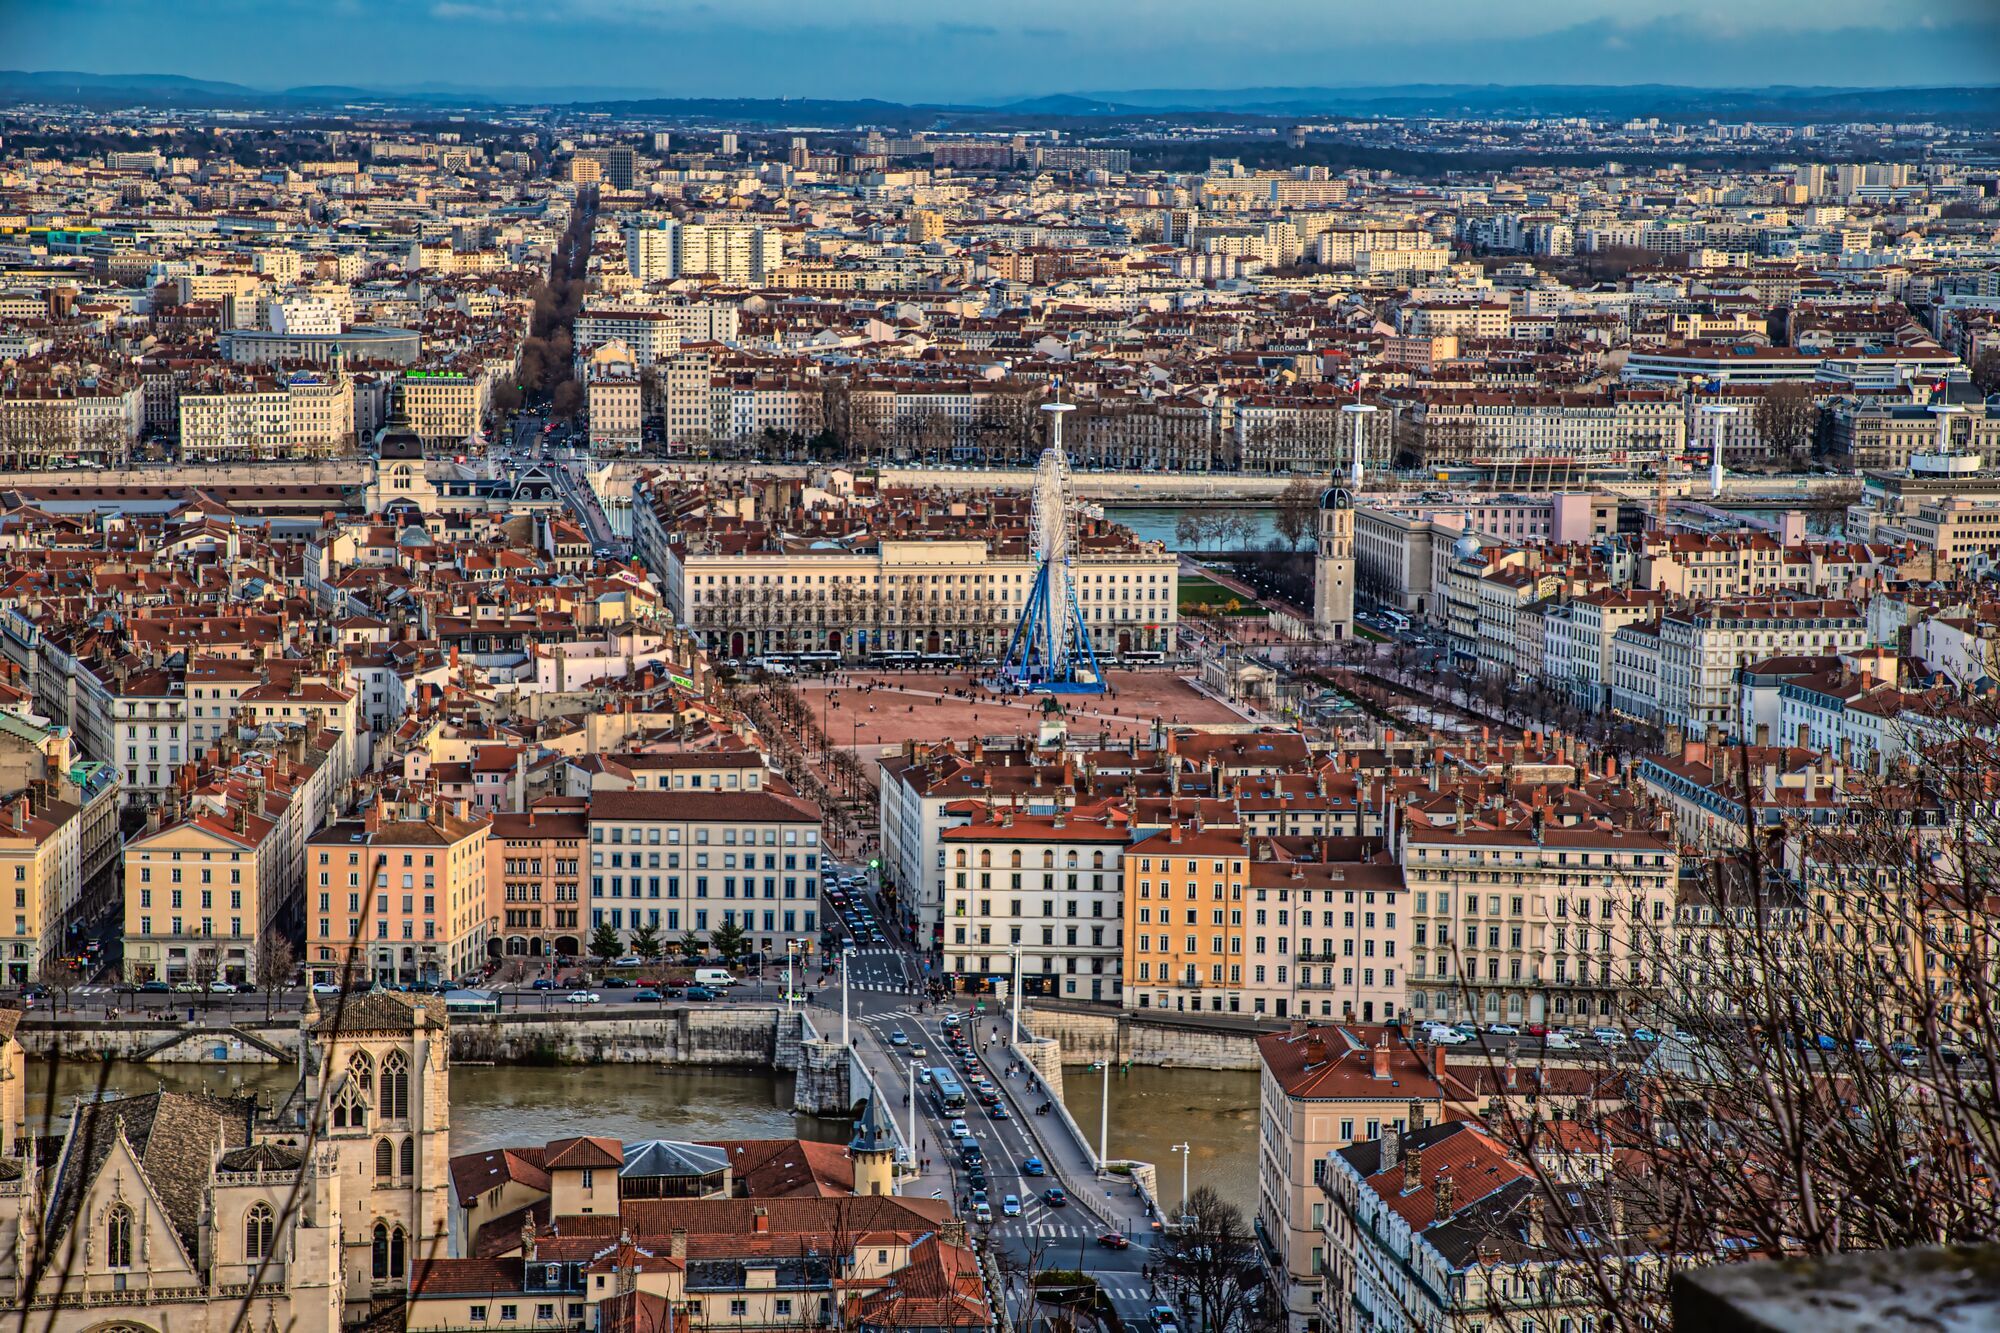 Europe's most interesting student cities: where to go for your next vacation